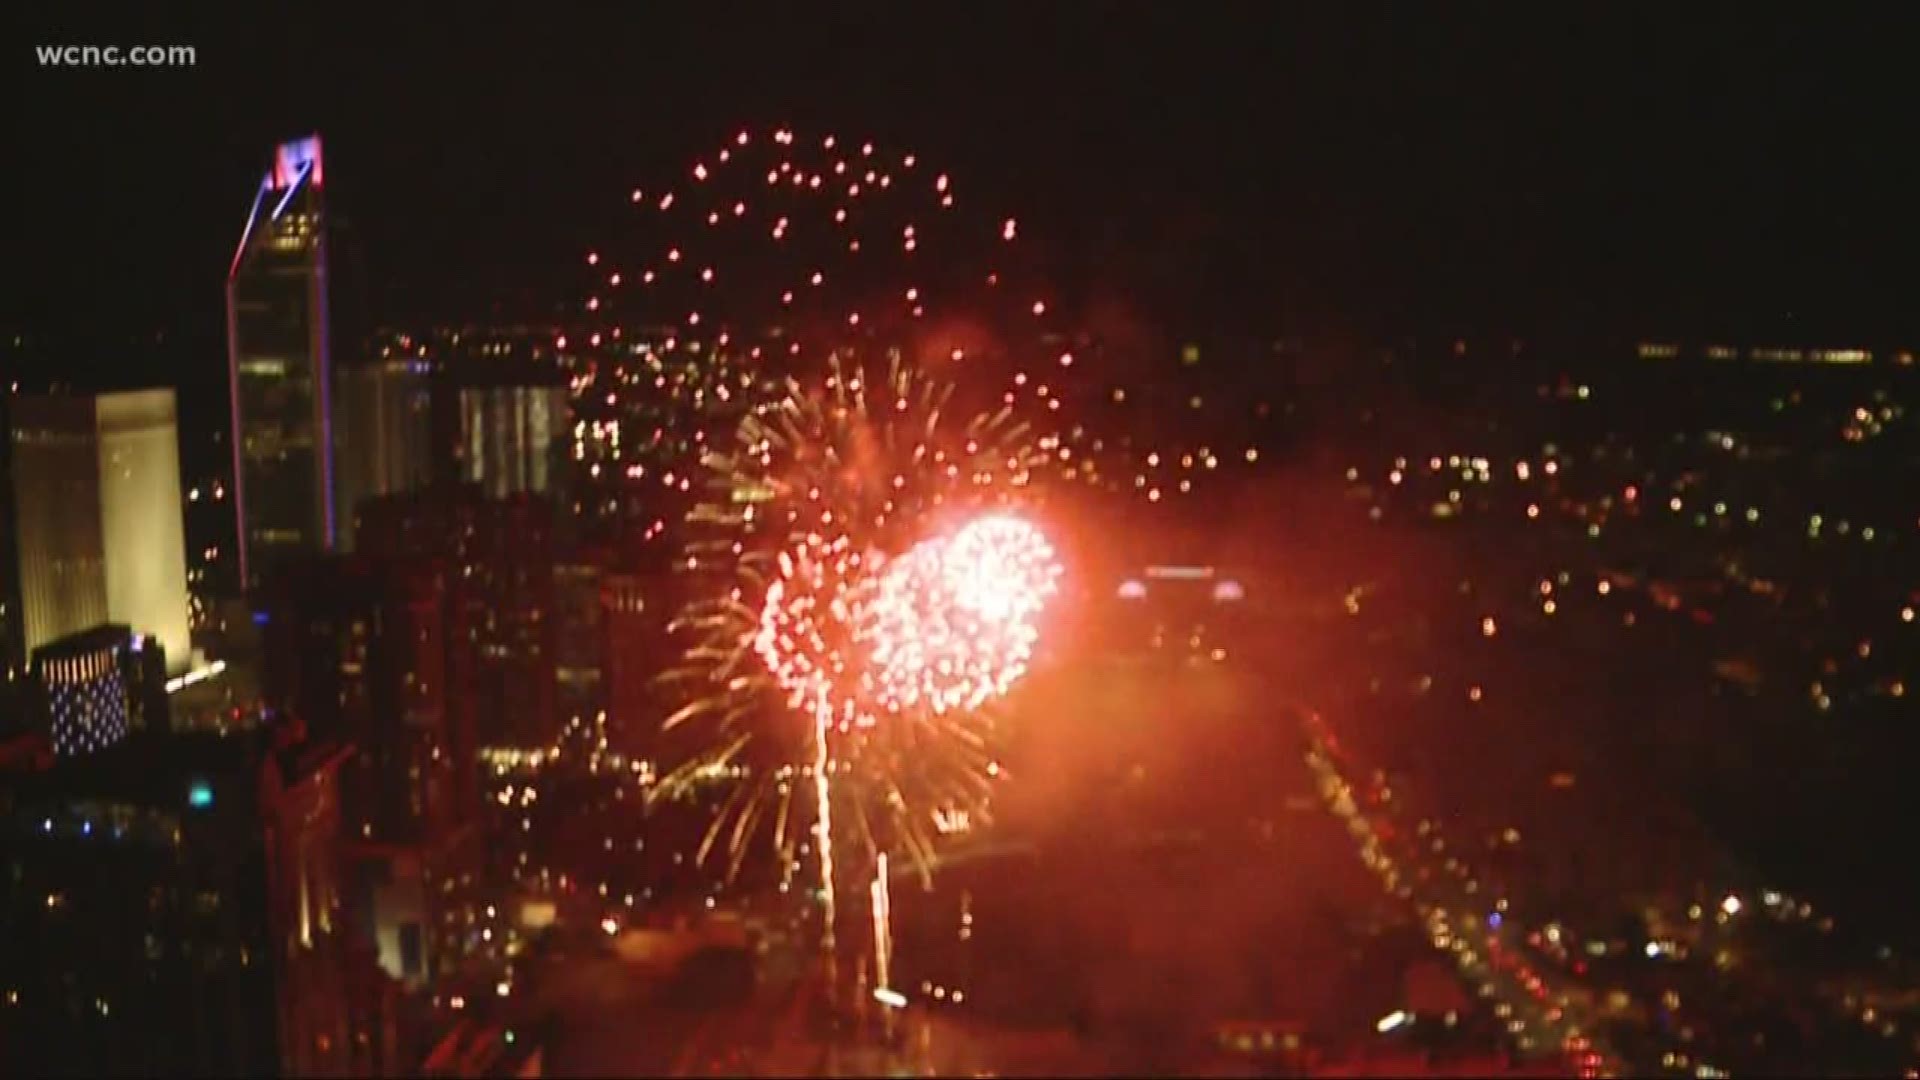 Tens of thousands of people packed into uptown Charlotte Wednesday night to celebrate the Fourth of July.